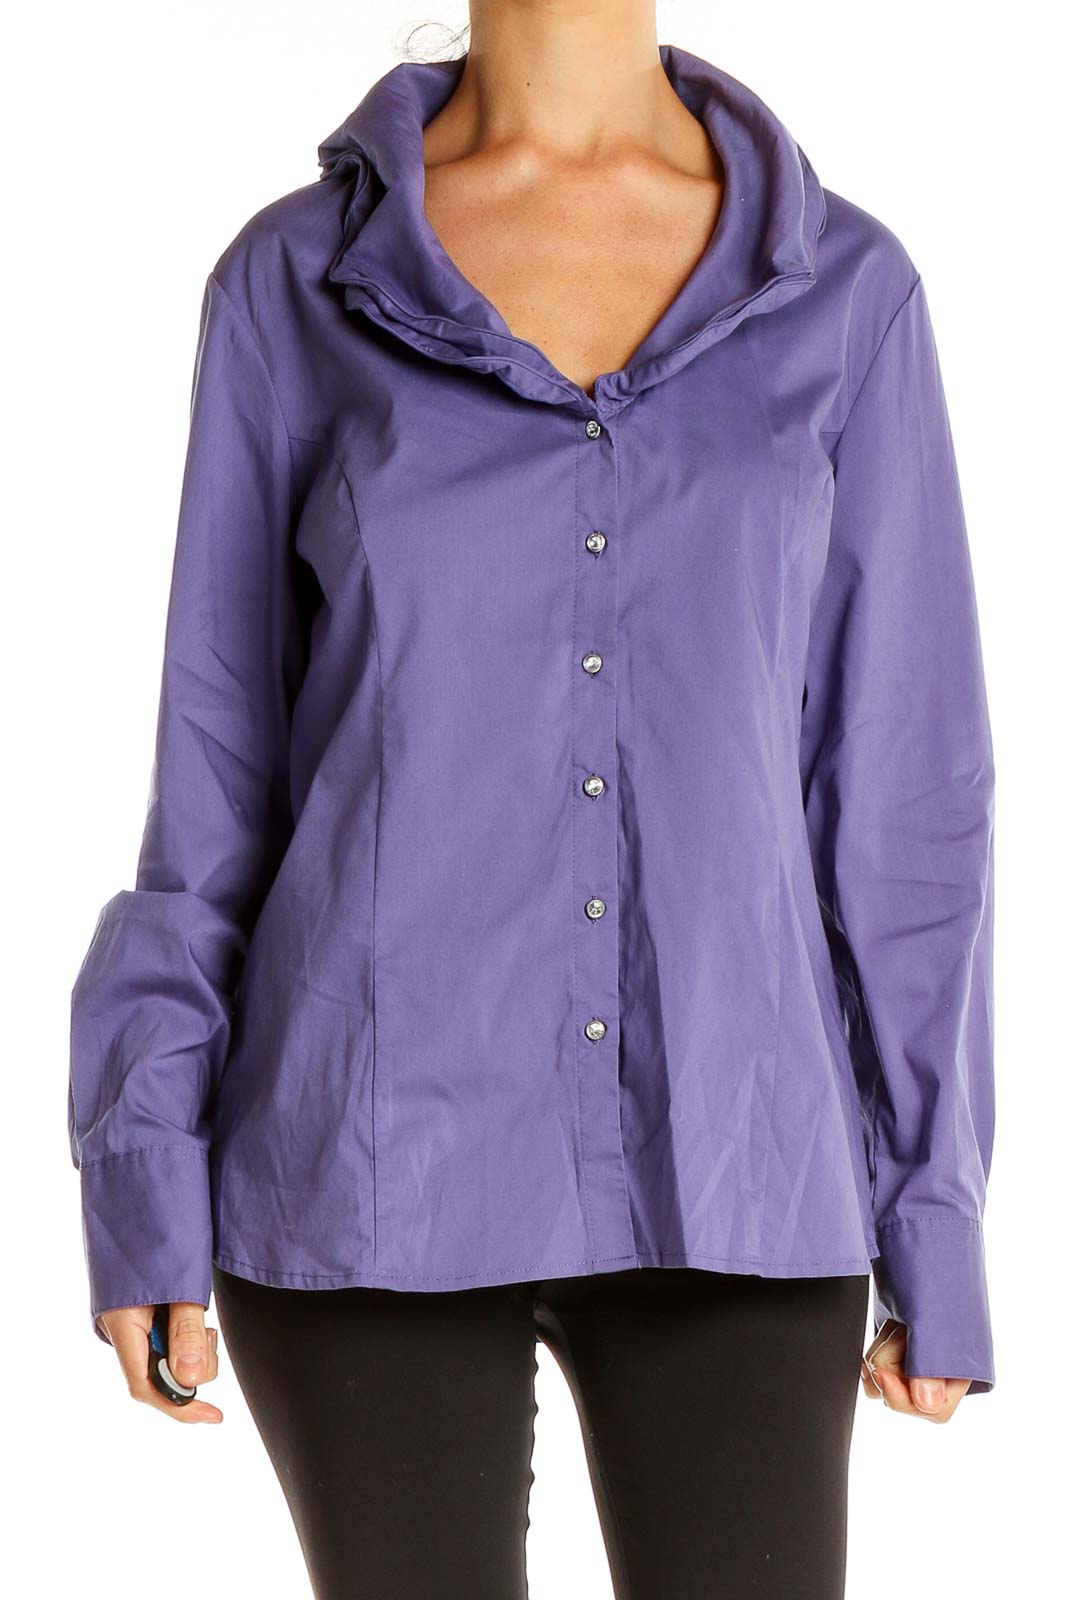 Purple All Day Wear Top Front